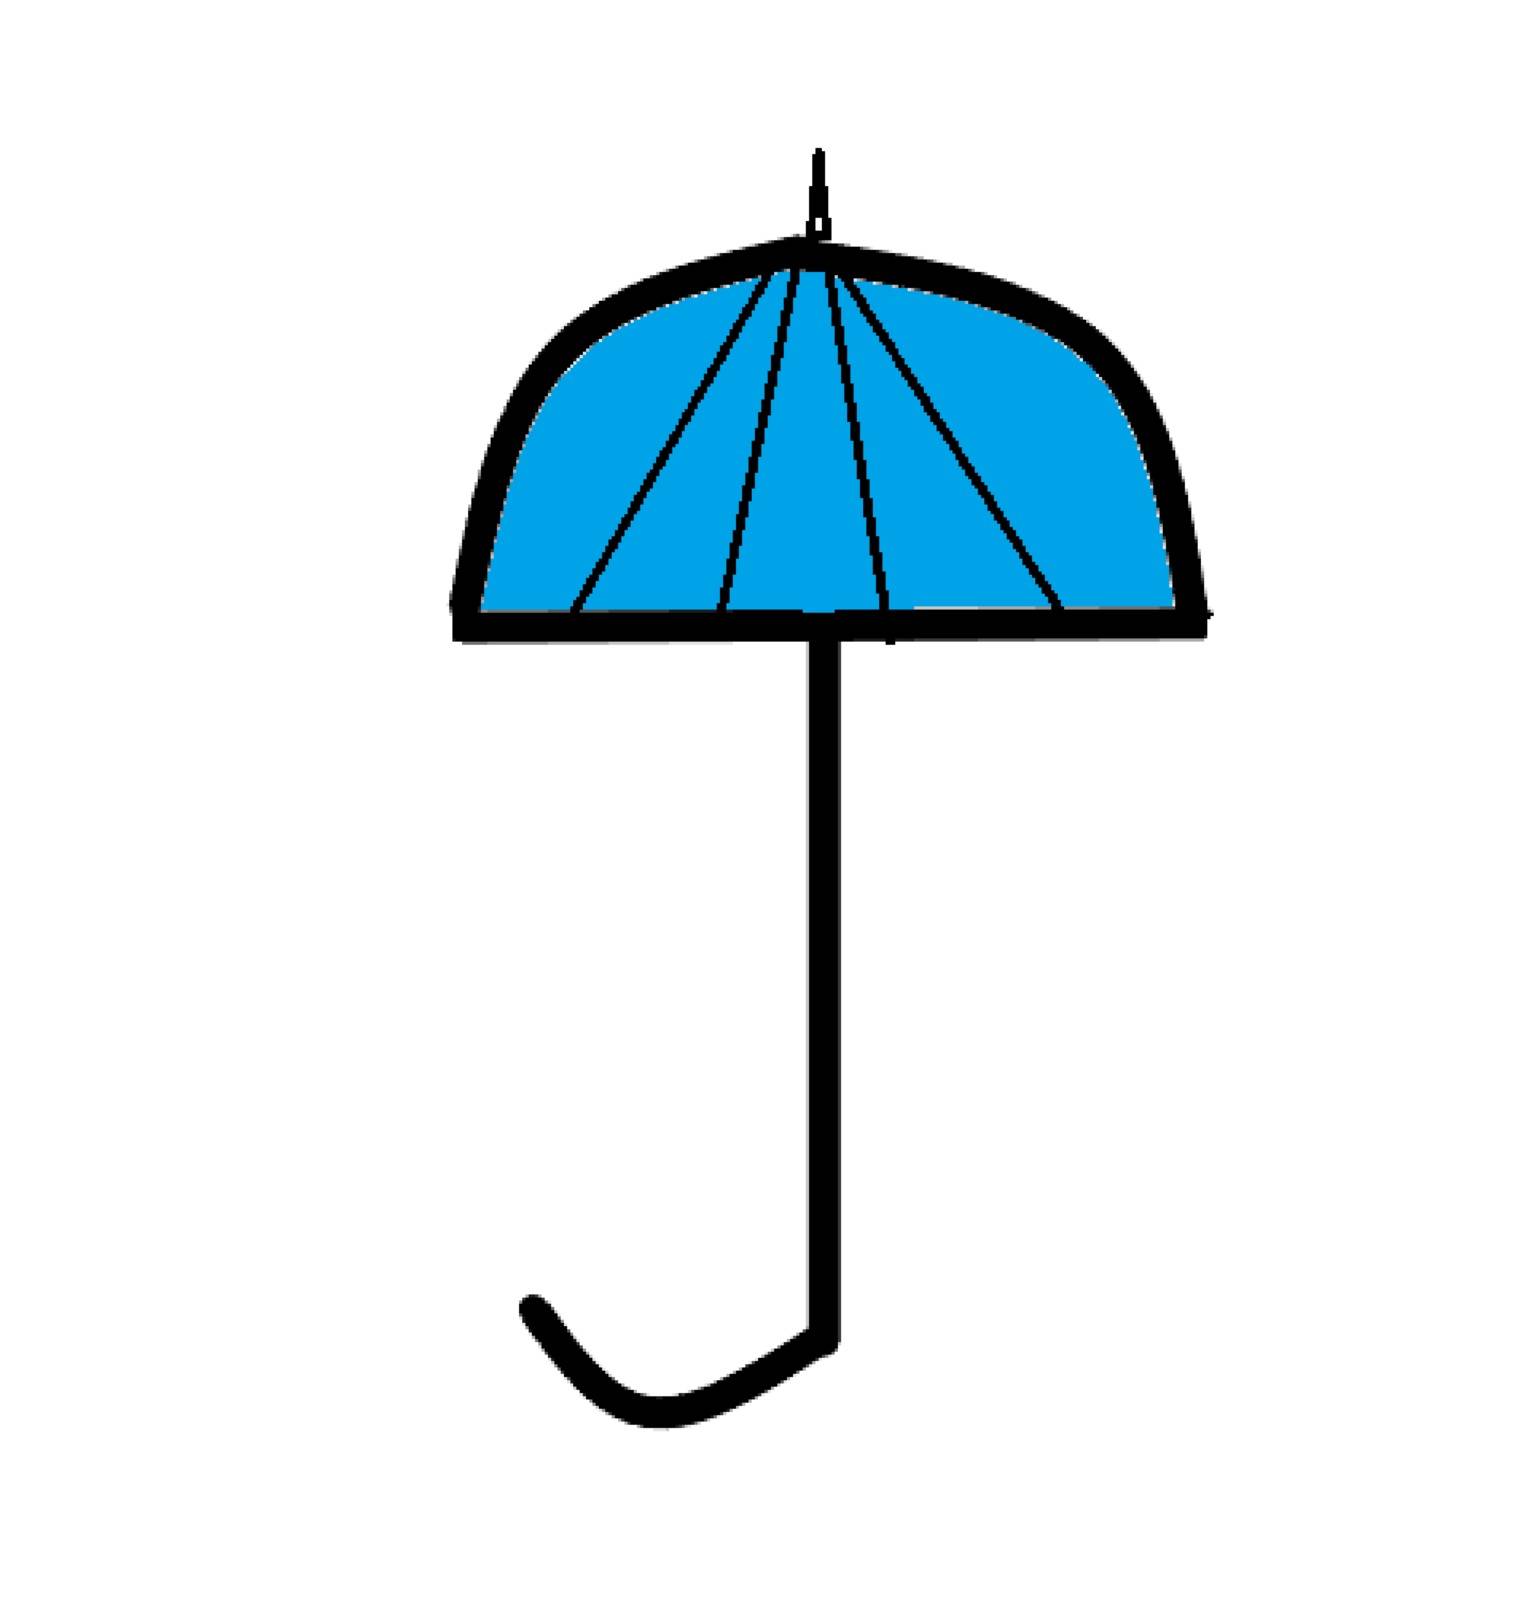 Picture of an umbrella